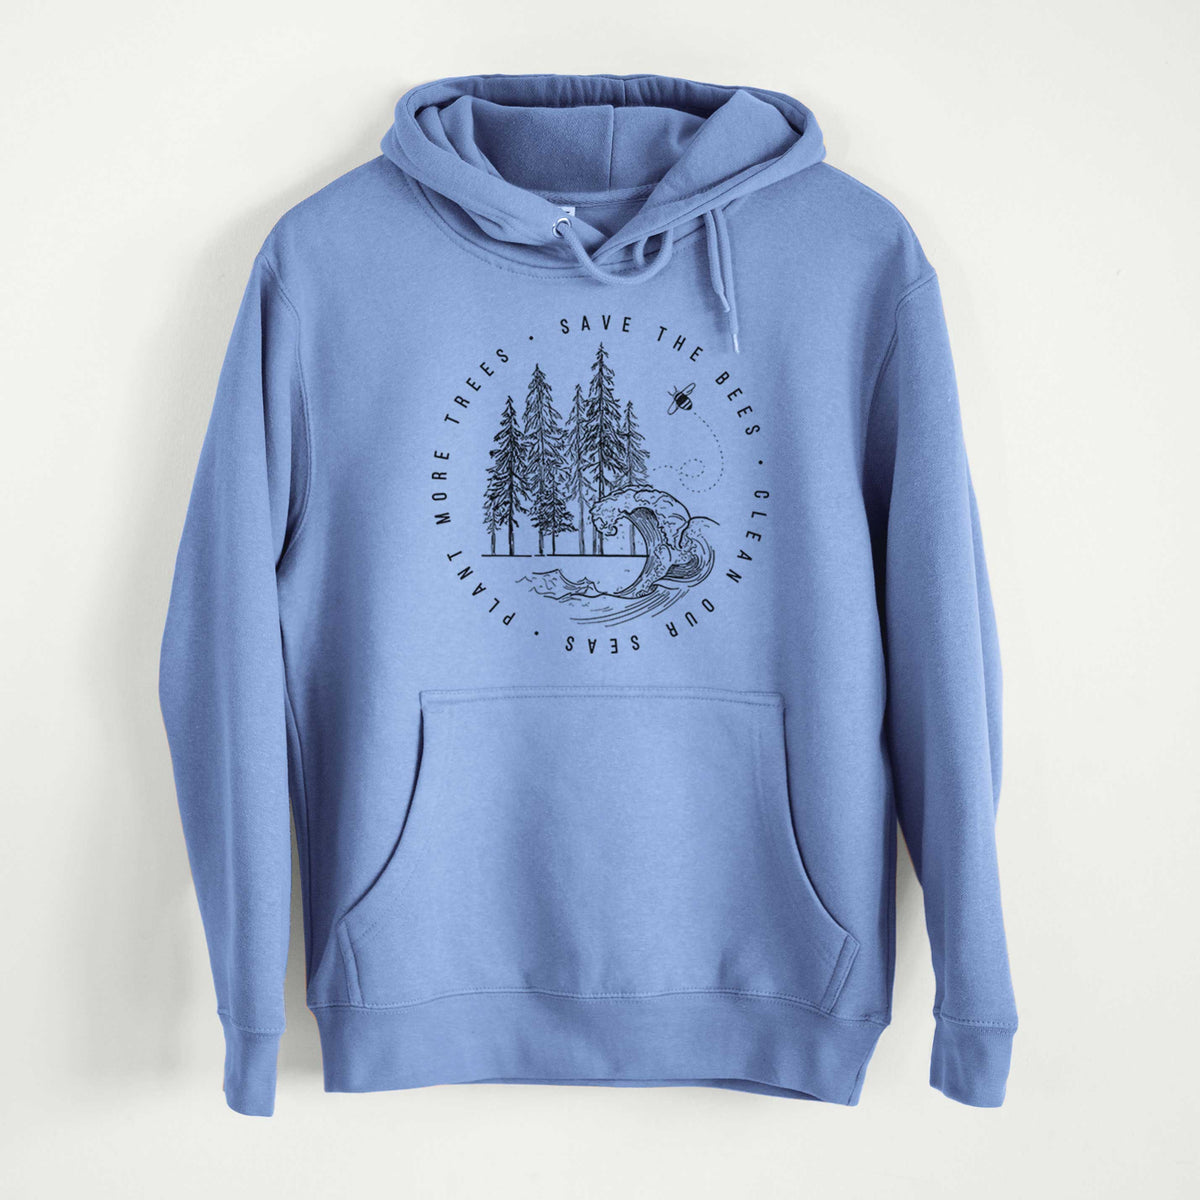 Save the Bees, Clean our Seas, Plant more Trees  - Mid-Weight Unisex Premium Blend Hoodie